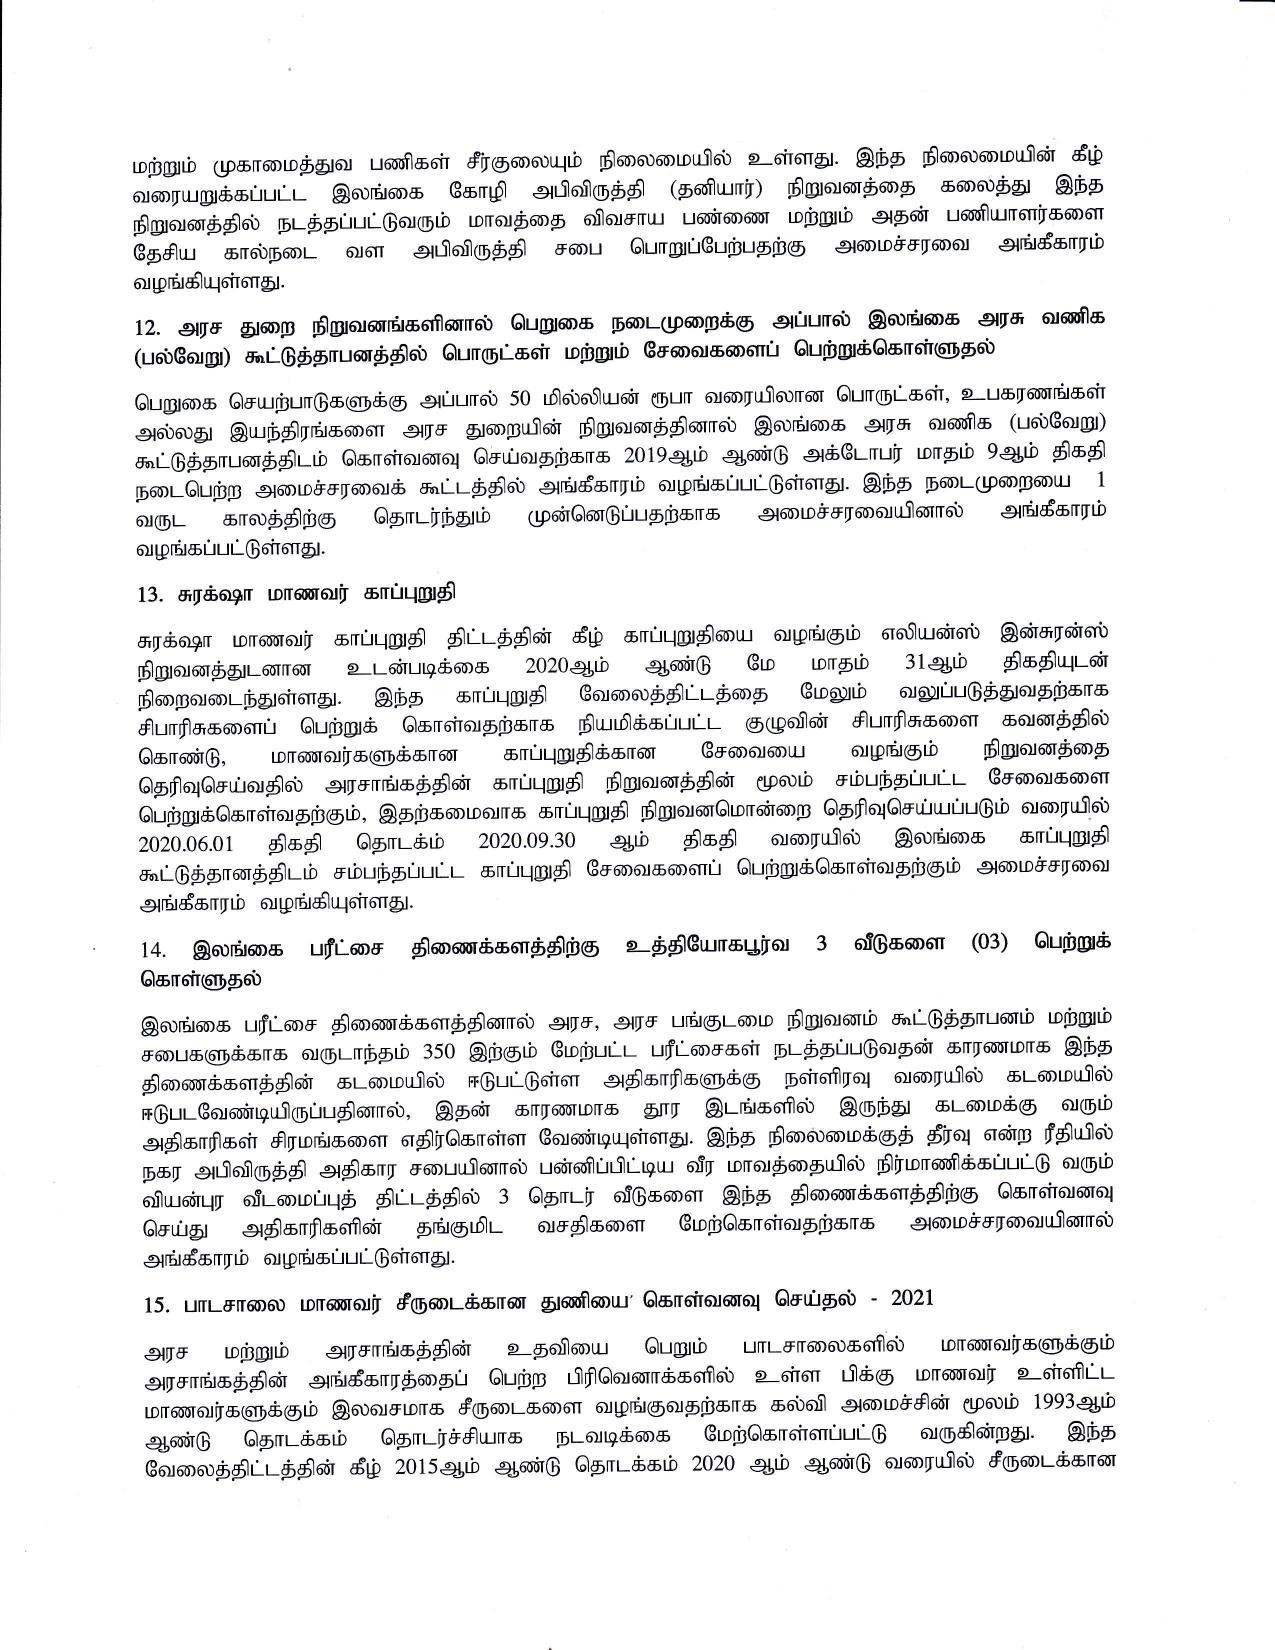 Tamil Cabinet 11.06.20 min page 005